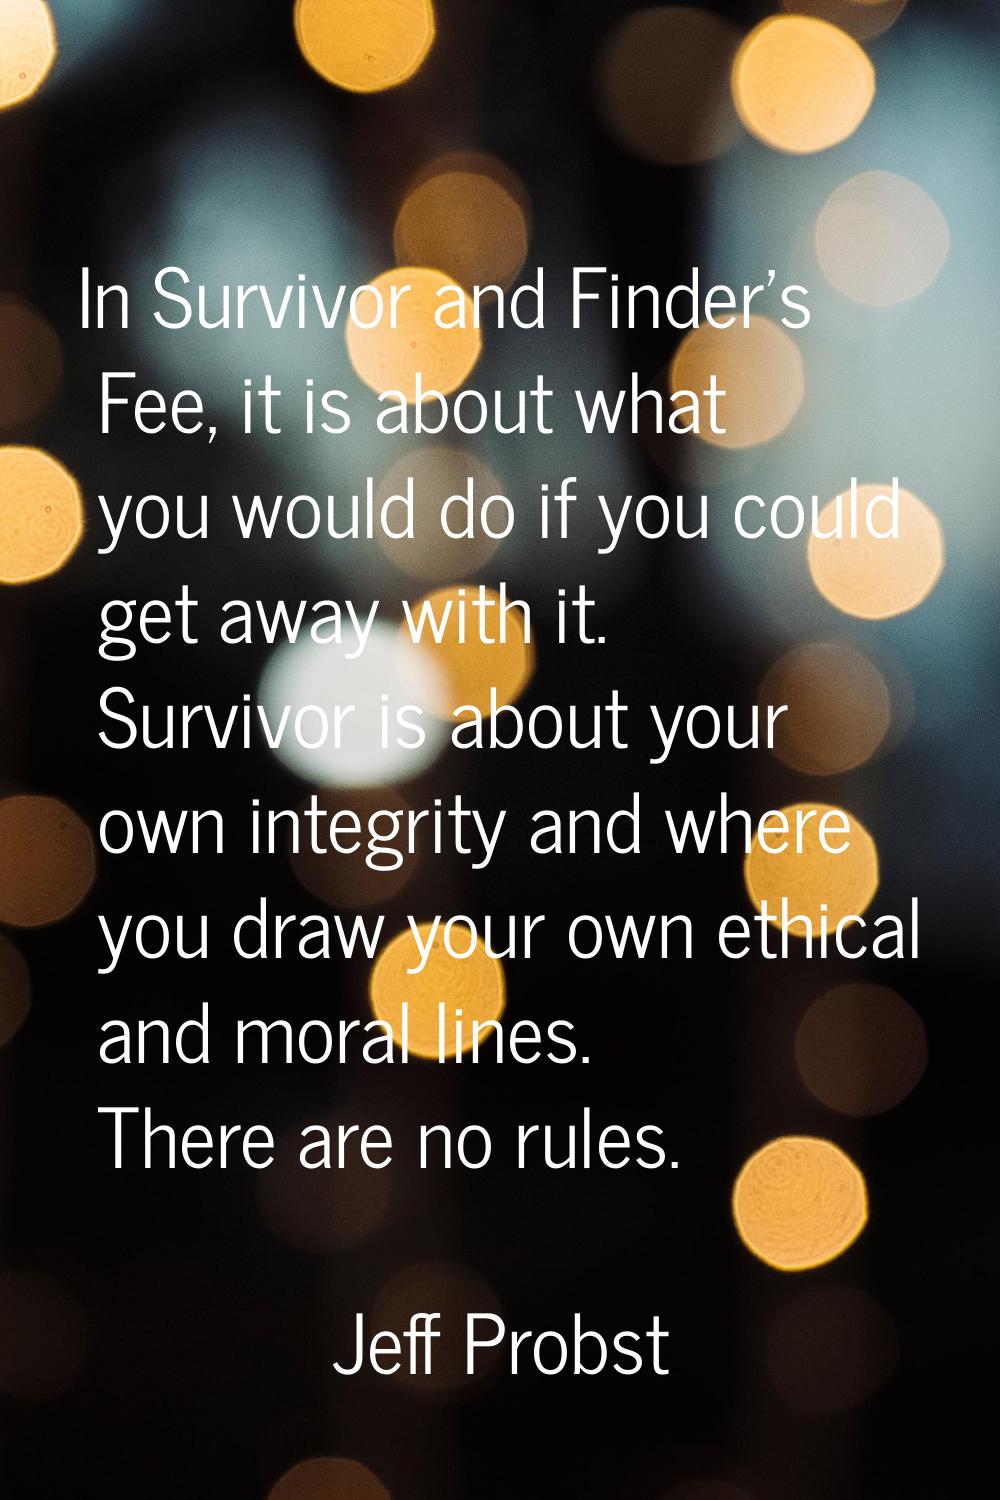 In Survivor and Finder's Fee, it is about what you would do if you could get away with it. Survivor